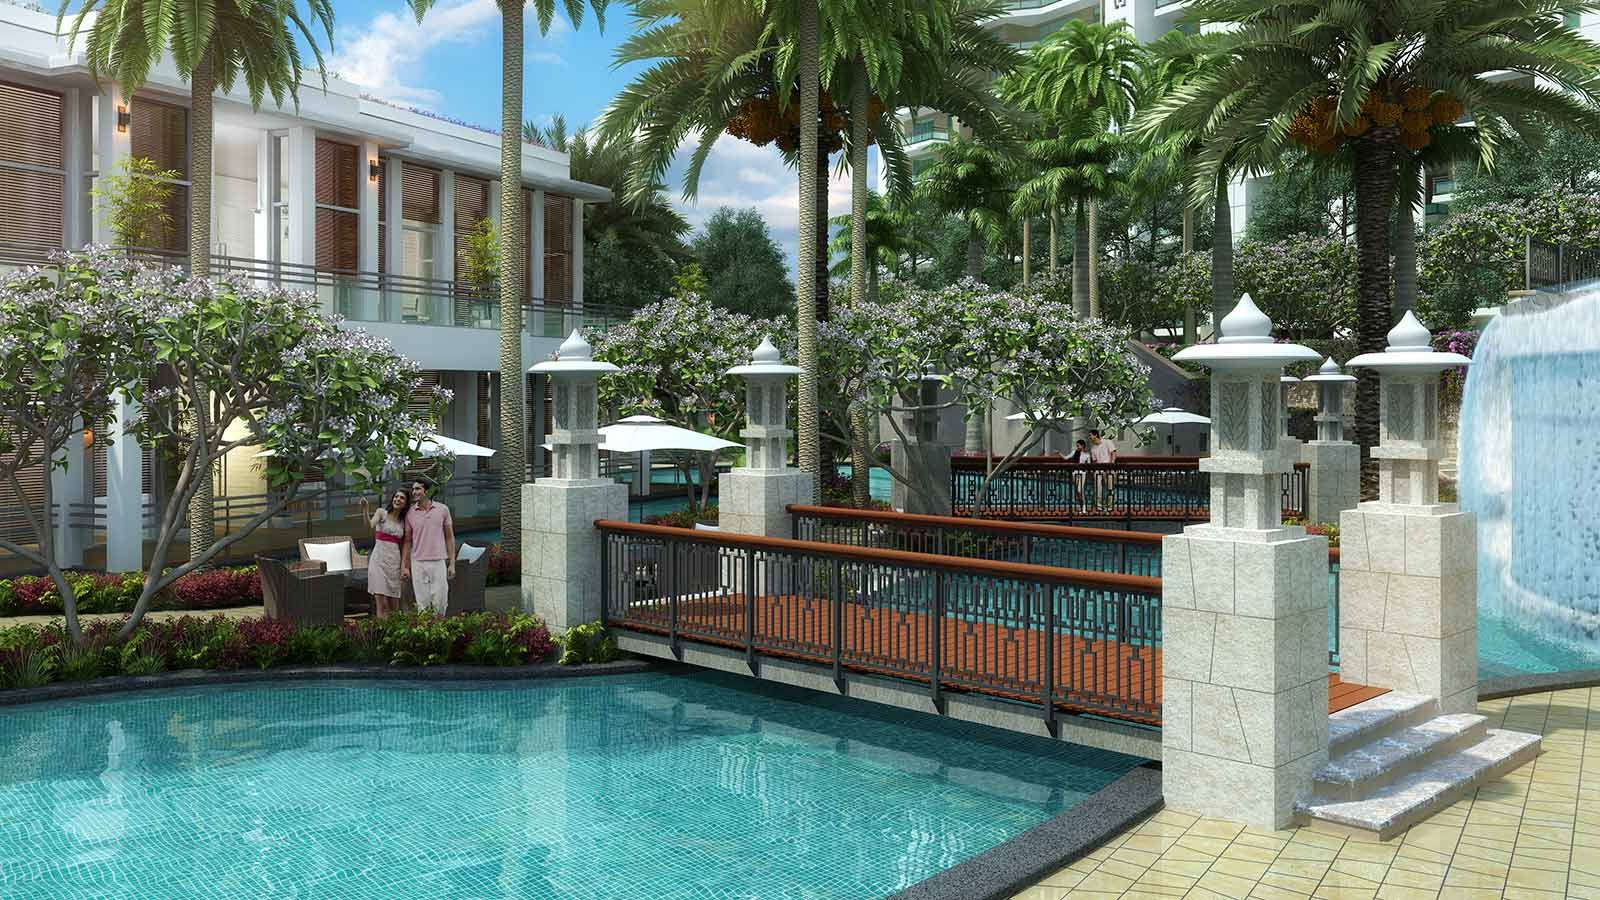 DLF The Crest Luxury Residential, Bridge Over Swimming Pool - Mace Group